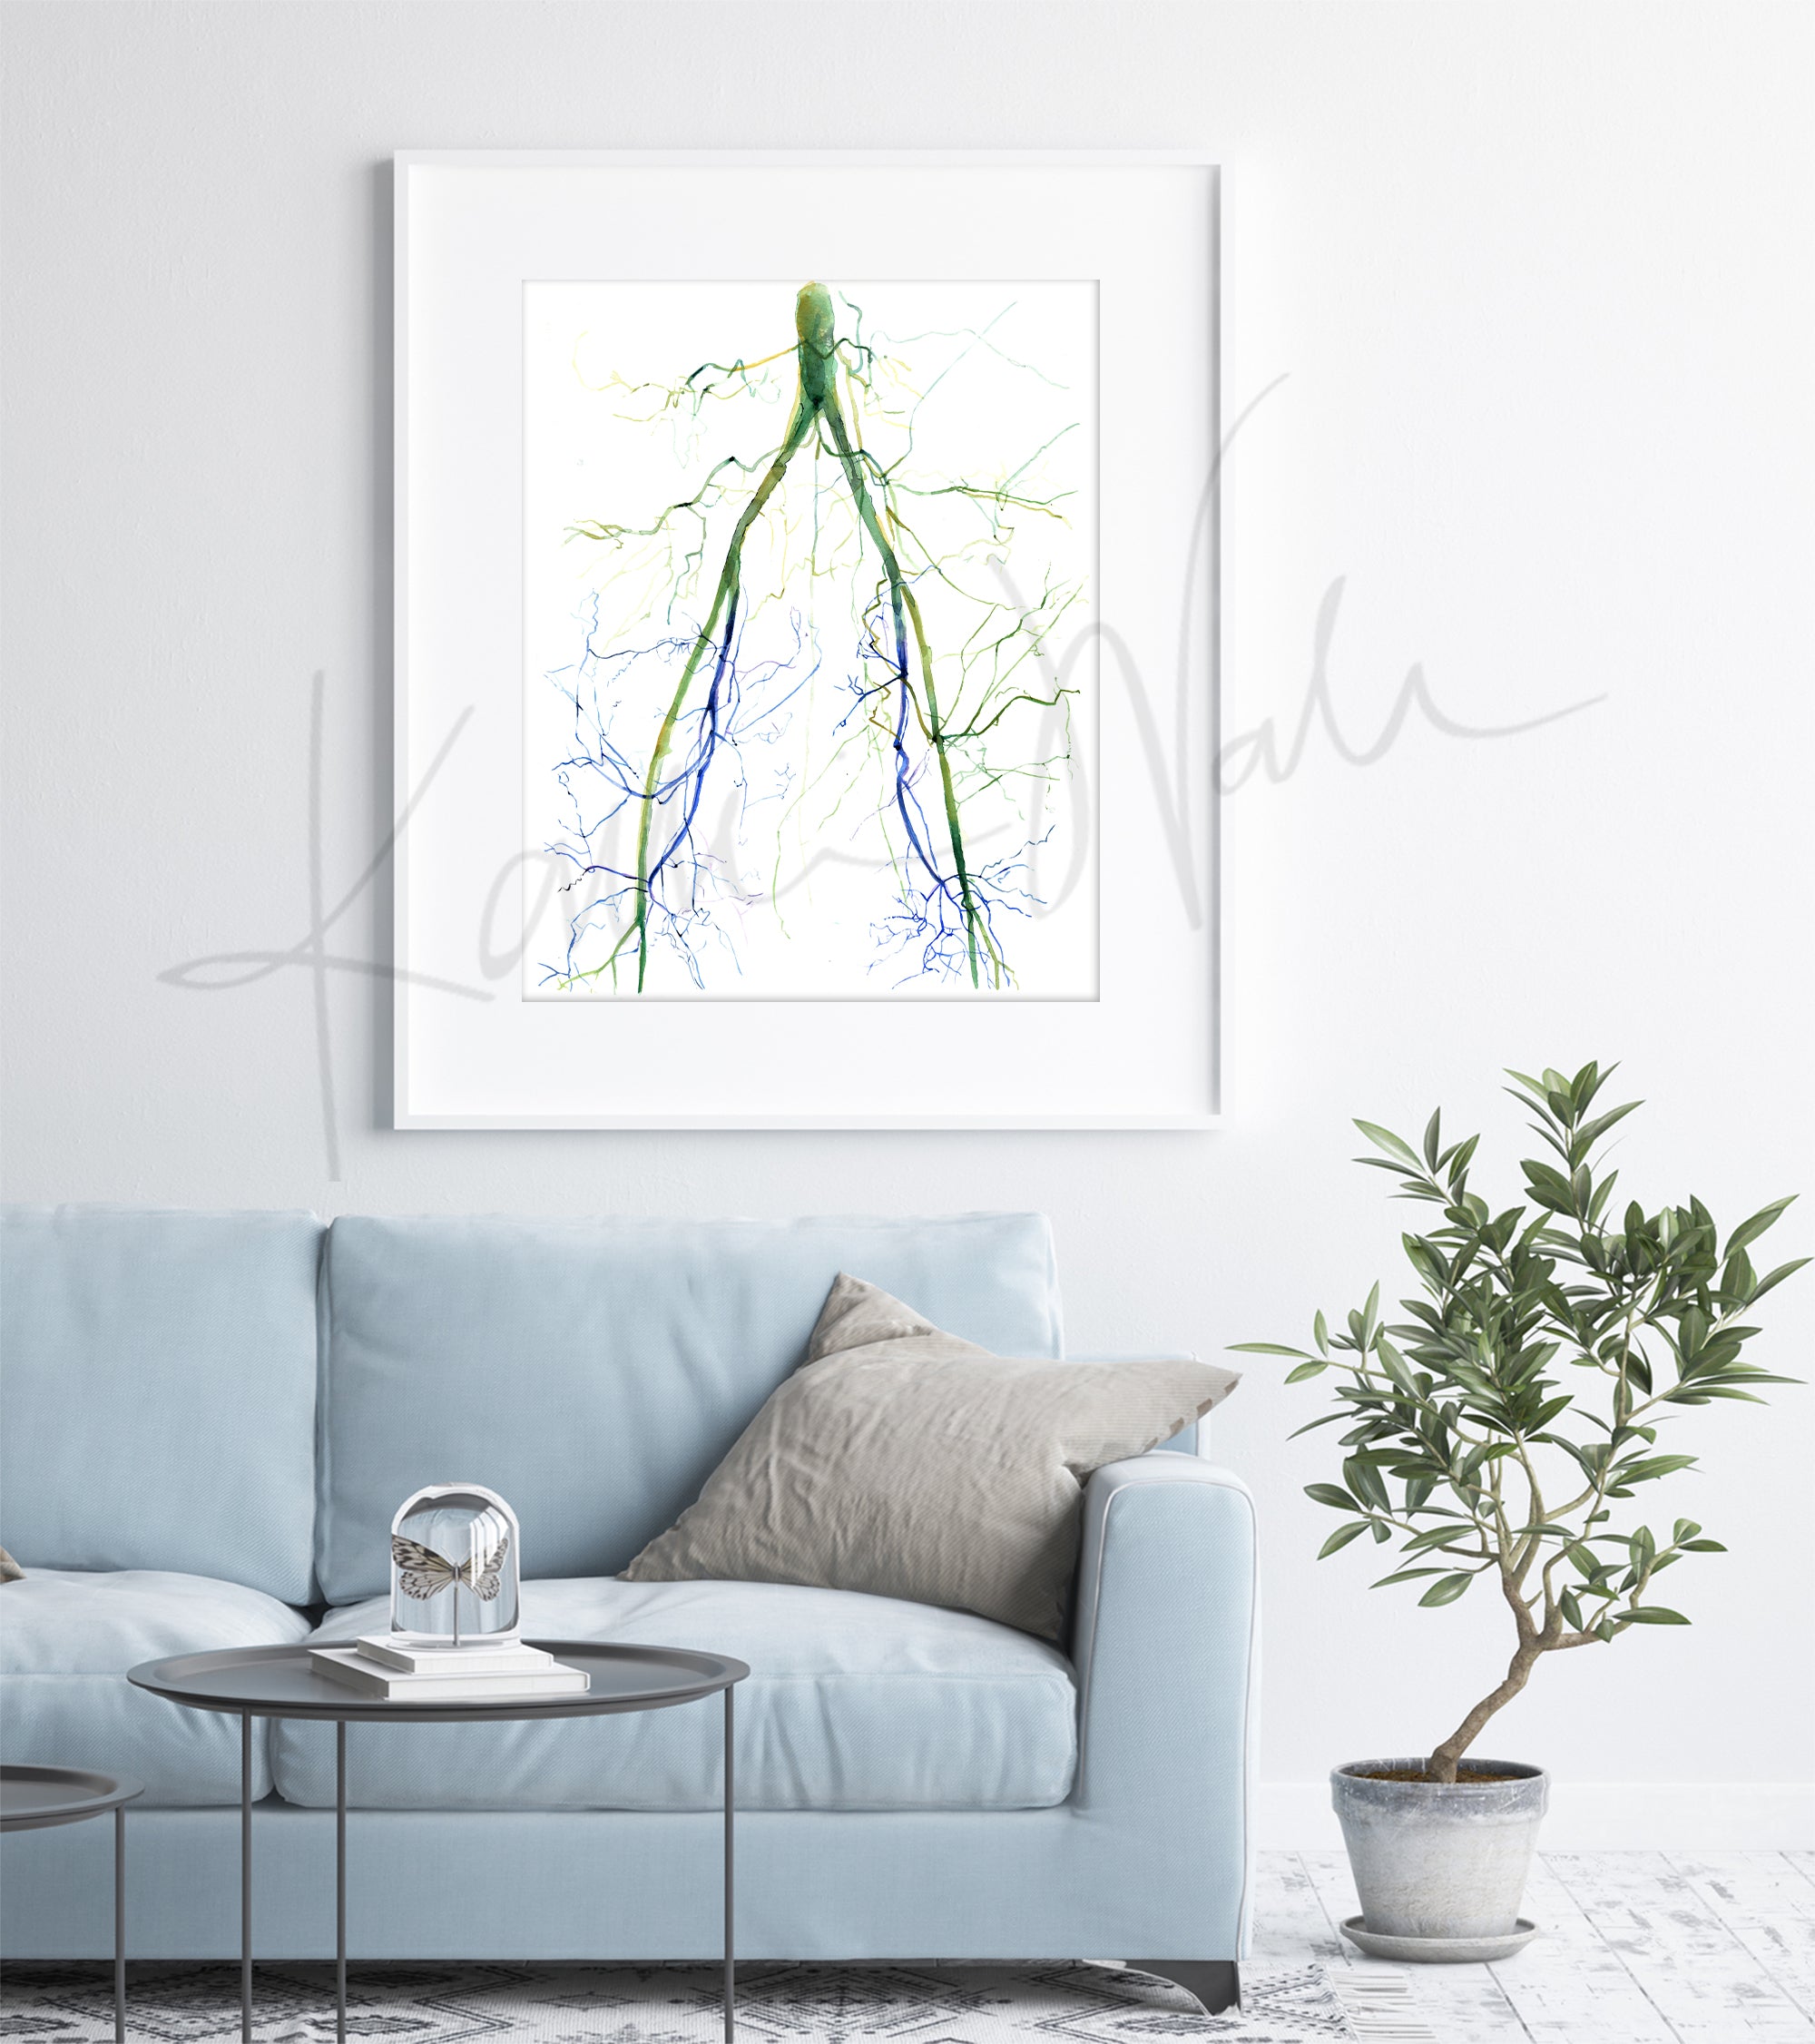 Framed watercolor painting of two angiograms combined into one. The painting shows the before of a blocked iliac artery and an after, unblocked iliac artery. The painting is hanging over a blue couch.